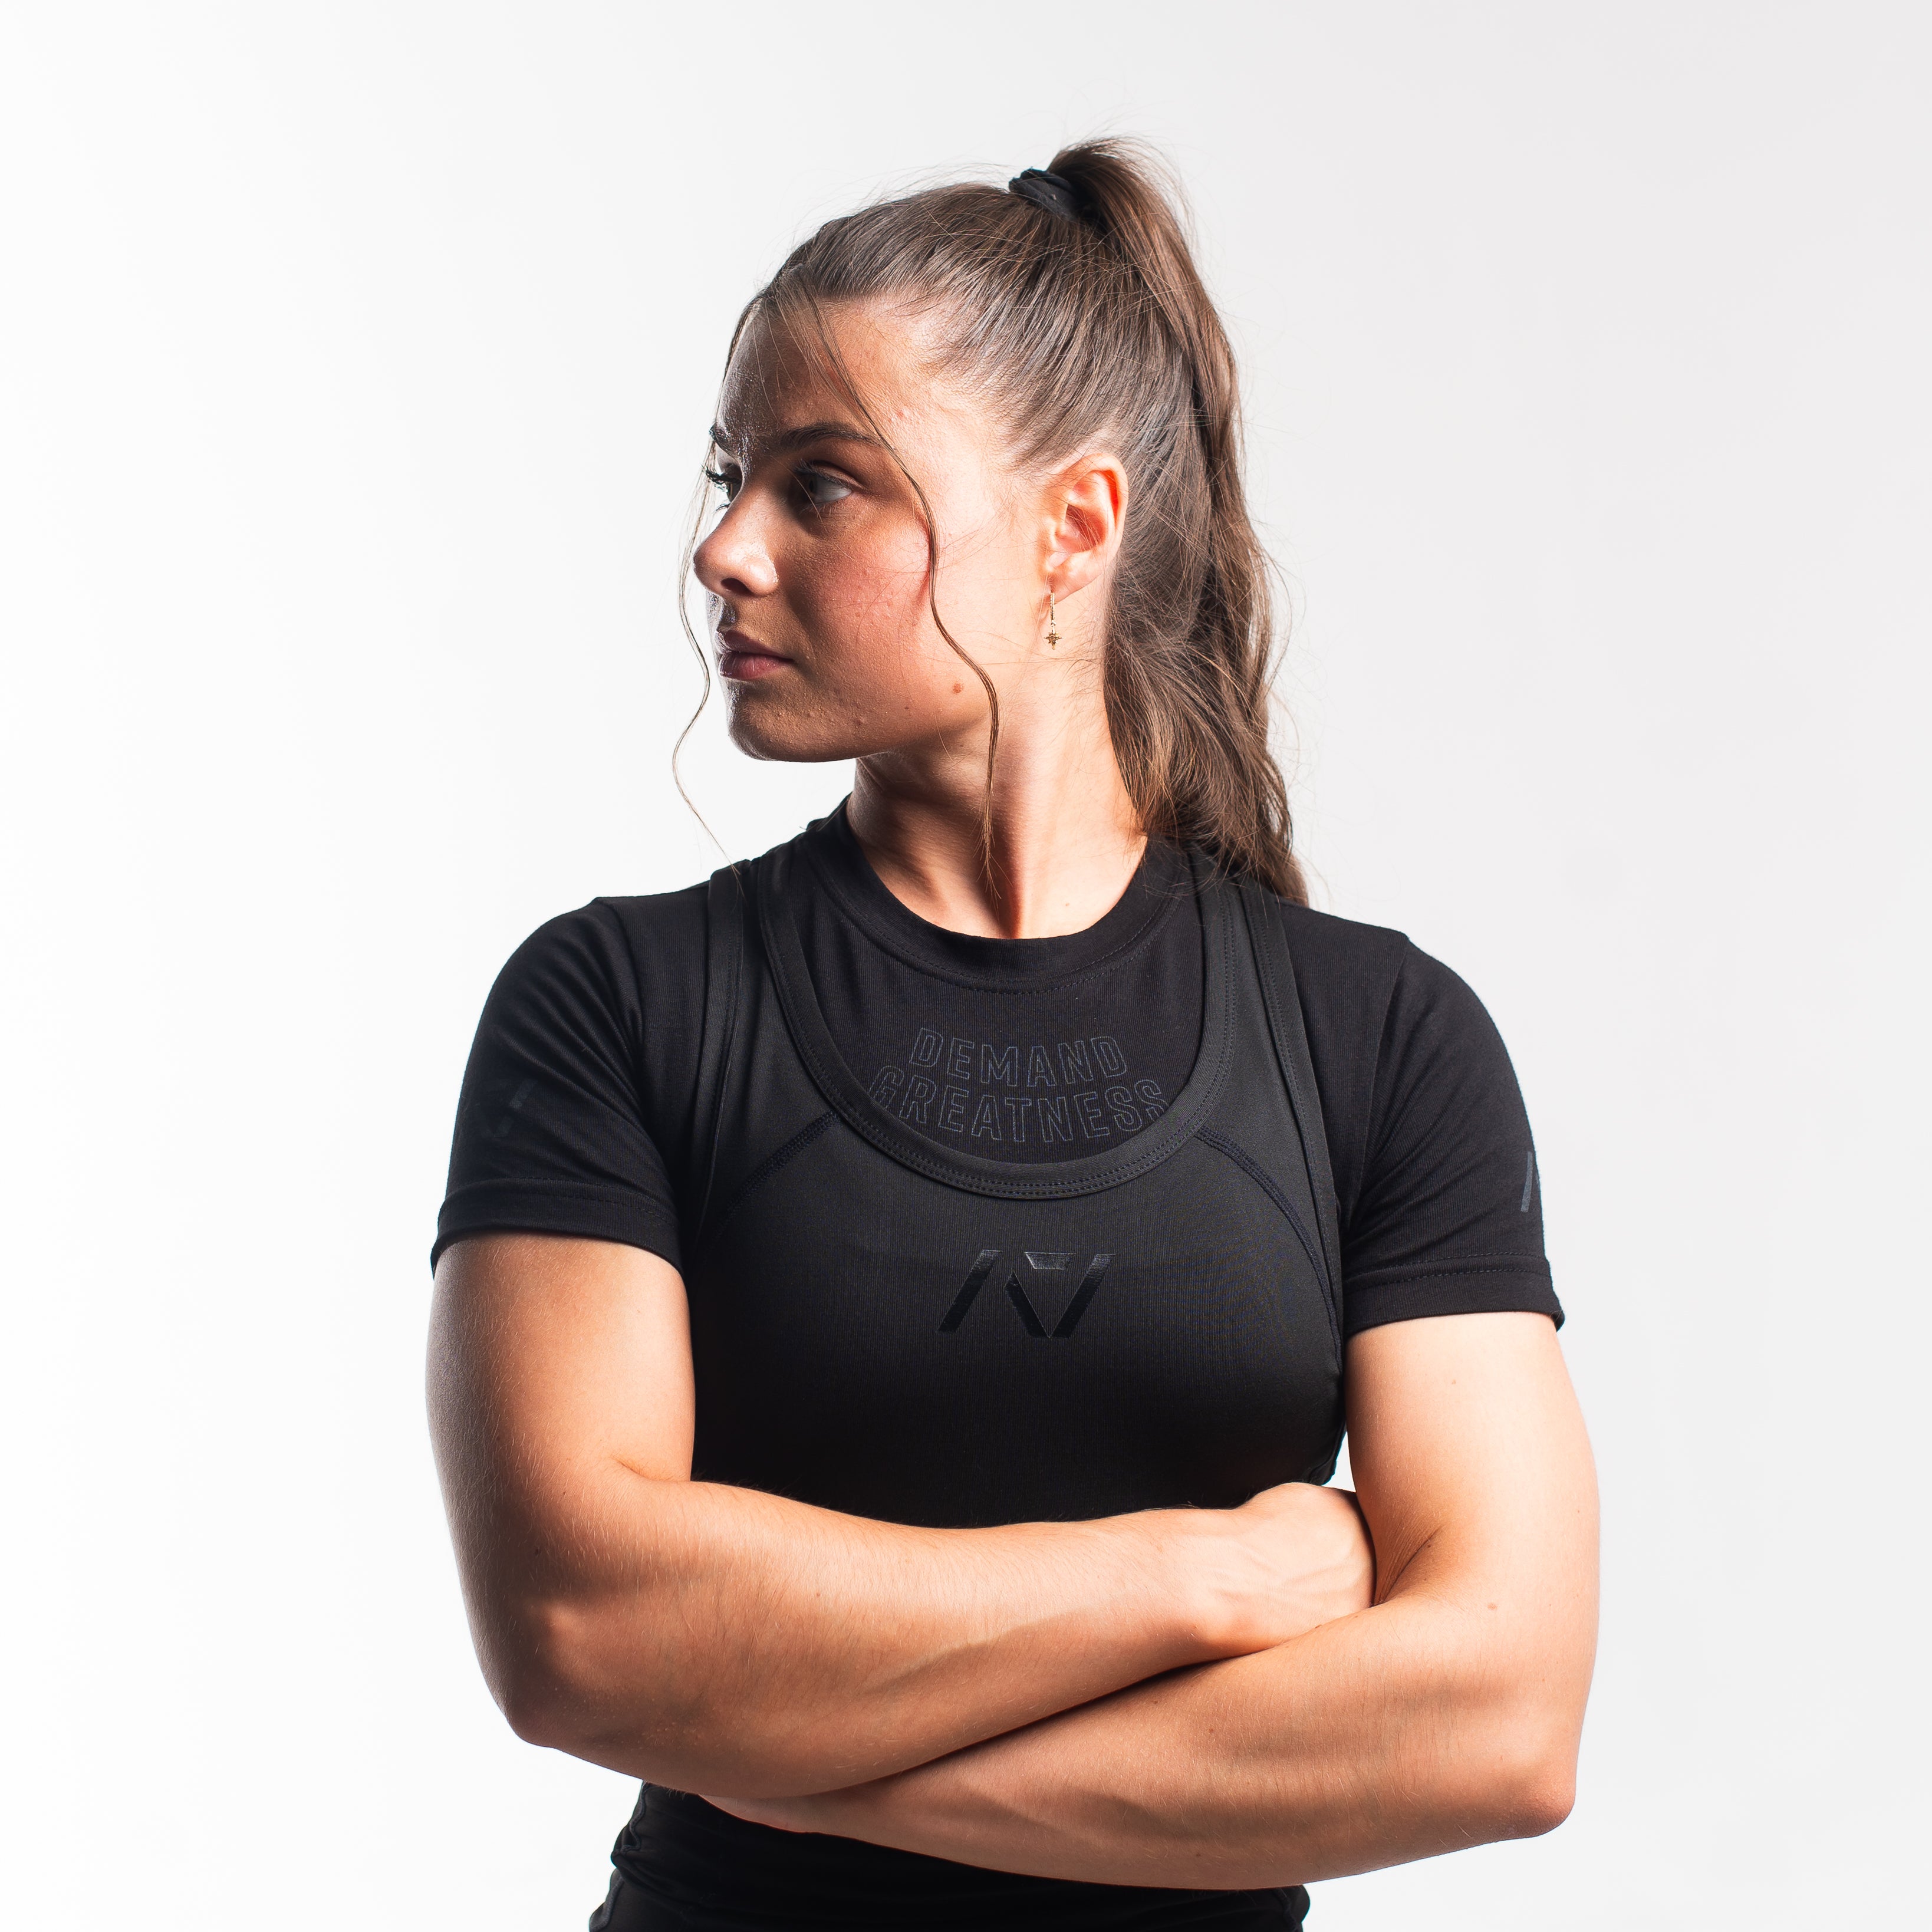 A7 IPF Approved Stealth Luno singlet with extra lat mobility, side panel stitching to guide the squat depth level and curved panel design for a slimming look. The Women's singlet features a tapered waist and additional quad room. The IPF Approved Kit includes Powerlifting Singlet, A7 Meet Shirt, A7 Zebra Wrist Wraps, A7 Deadlift Socks, Hourglass Knee Sleeves (Stiff Knee Sleeves and Rigor Mortis Knee Sleeves). Genouillères powerlifting shipping to France, Spain, Ireland, Germany, Italy, Sweden and EU.